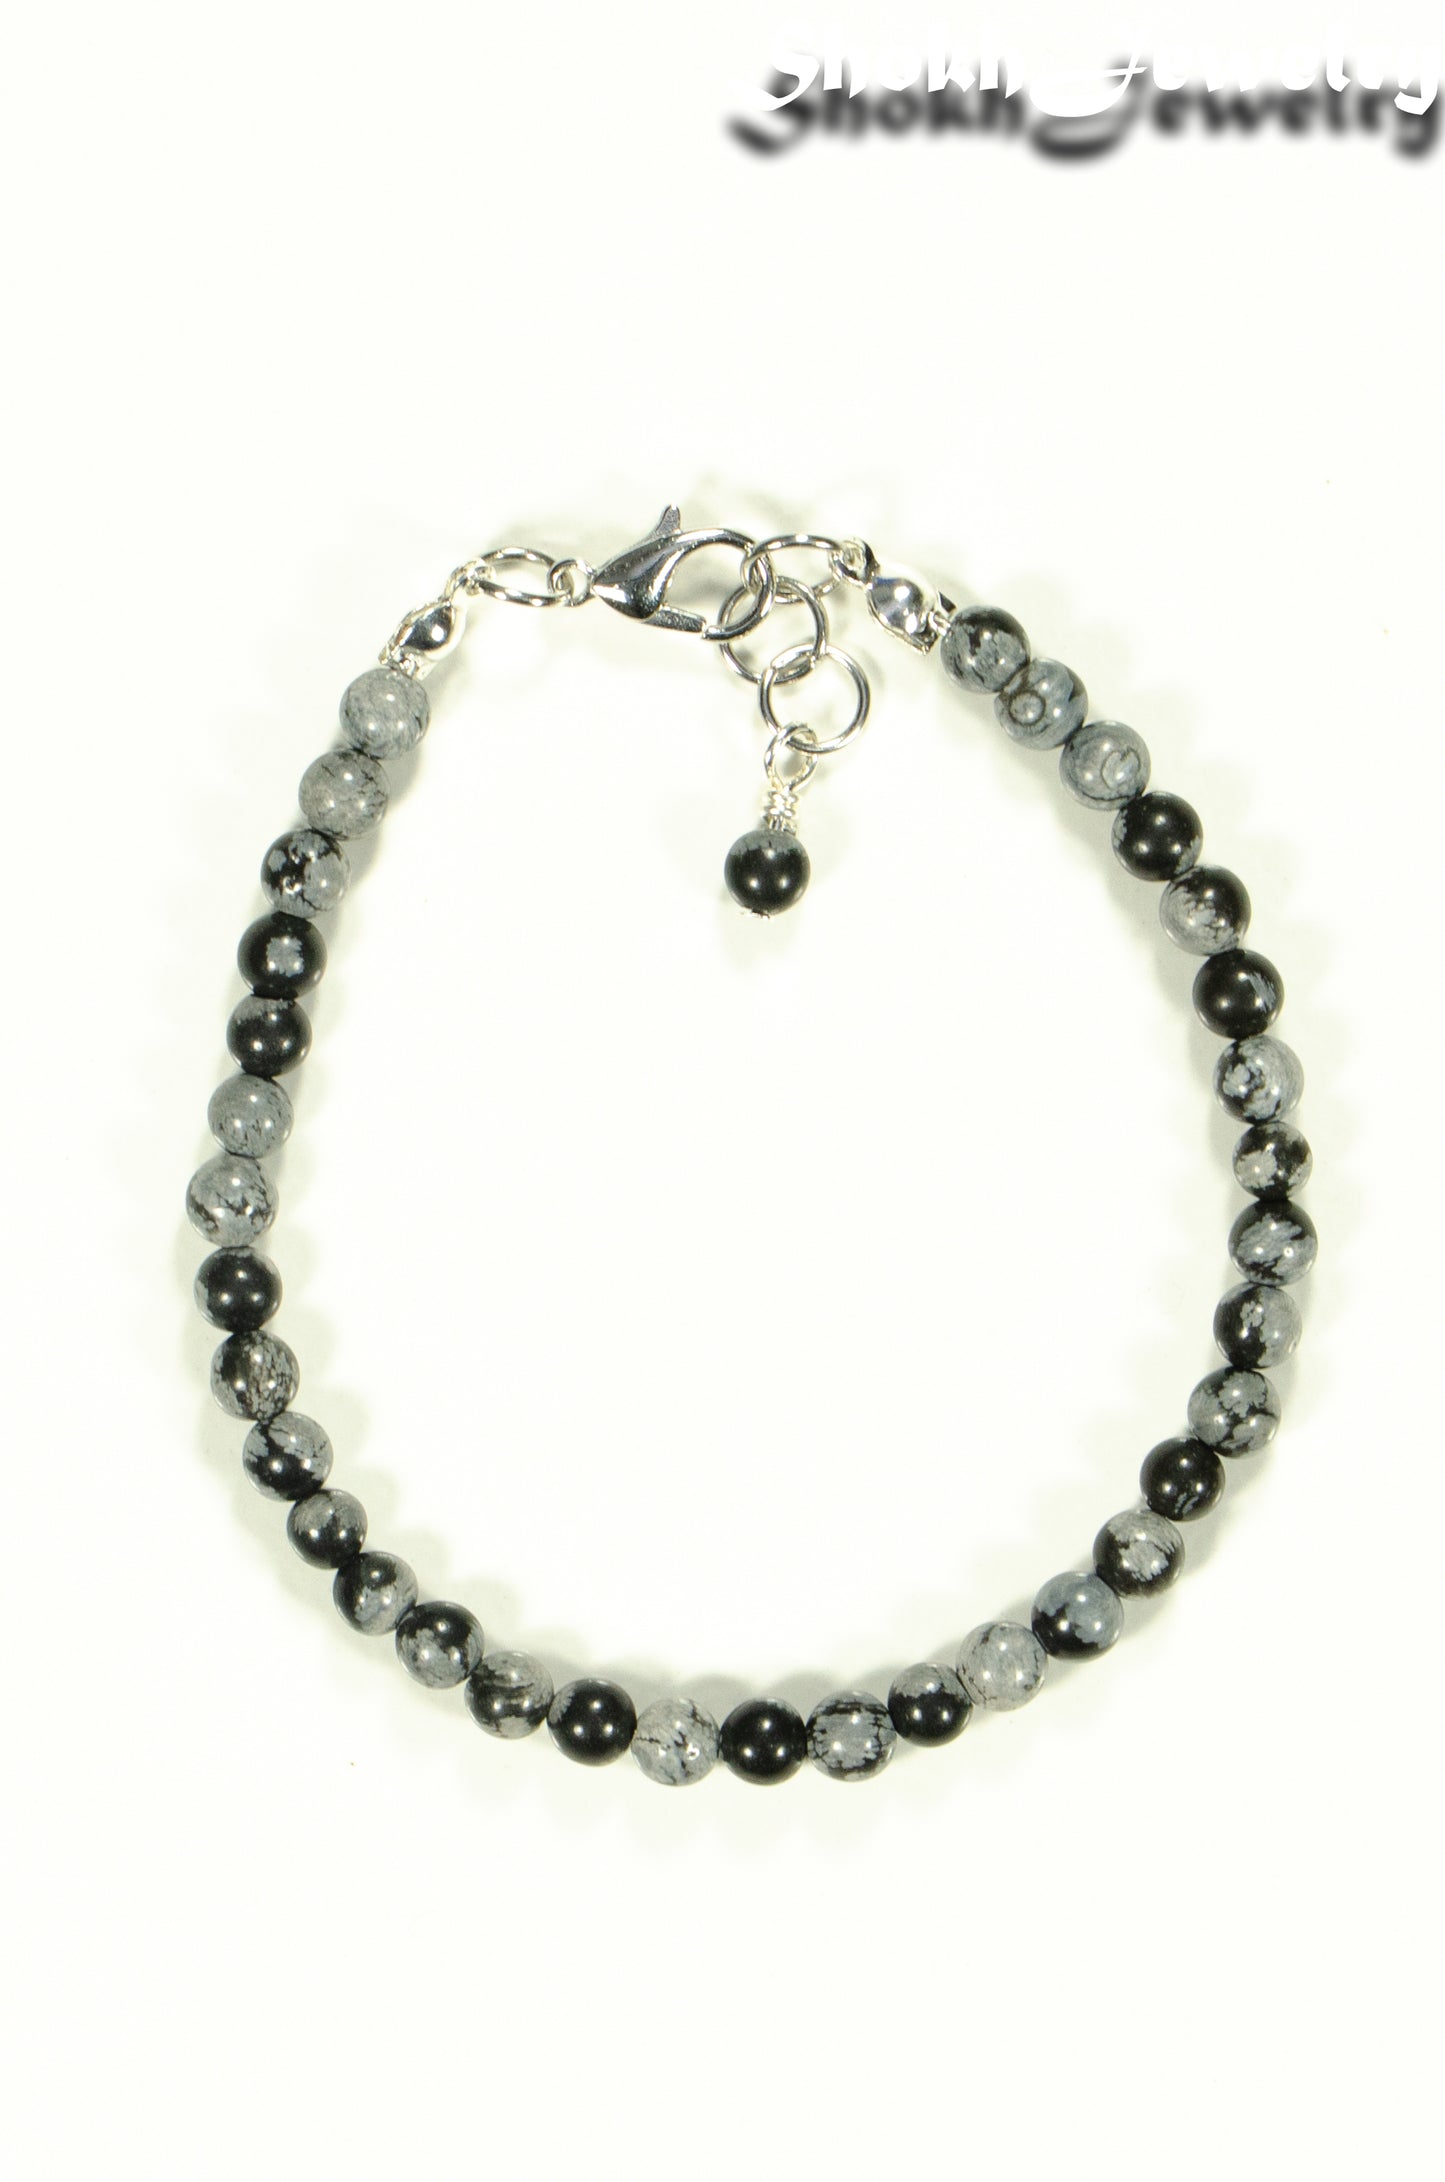 Top view of 4mm Snowflake Obsidian Stone Bracelet with Clasp.